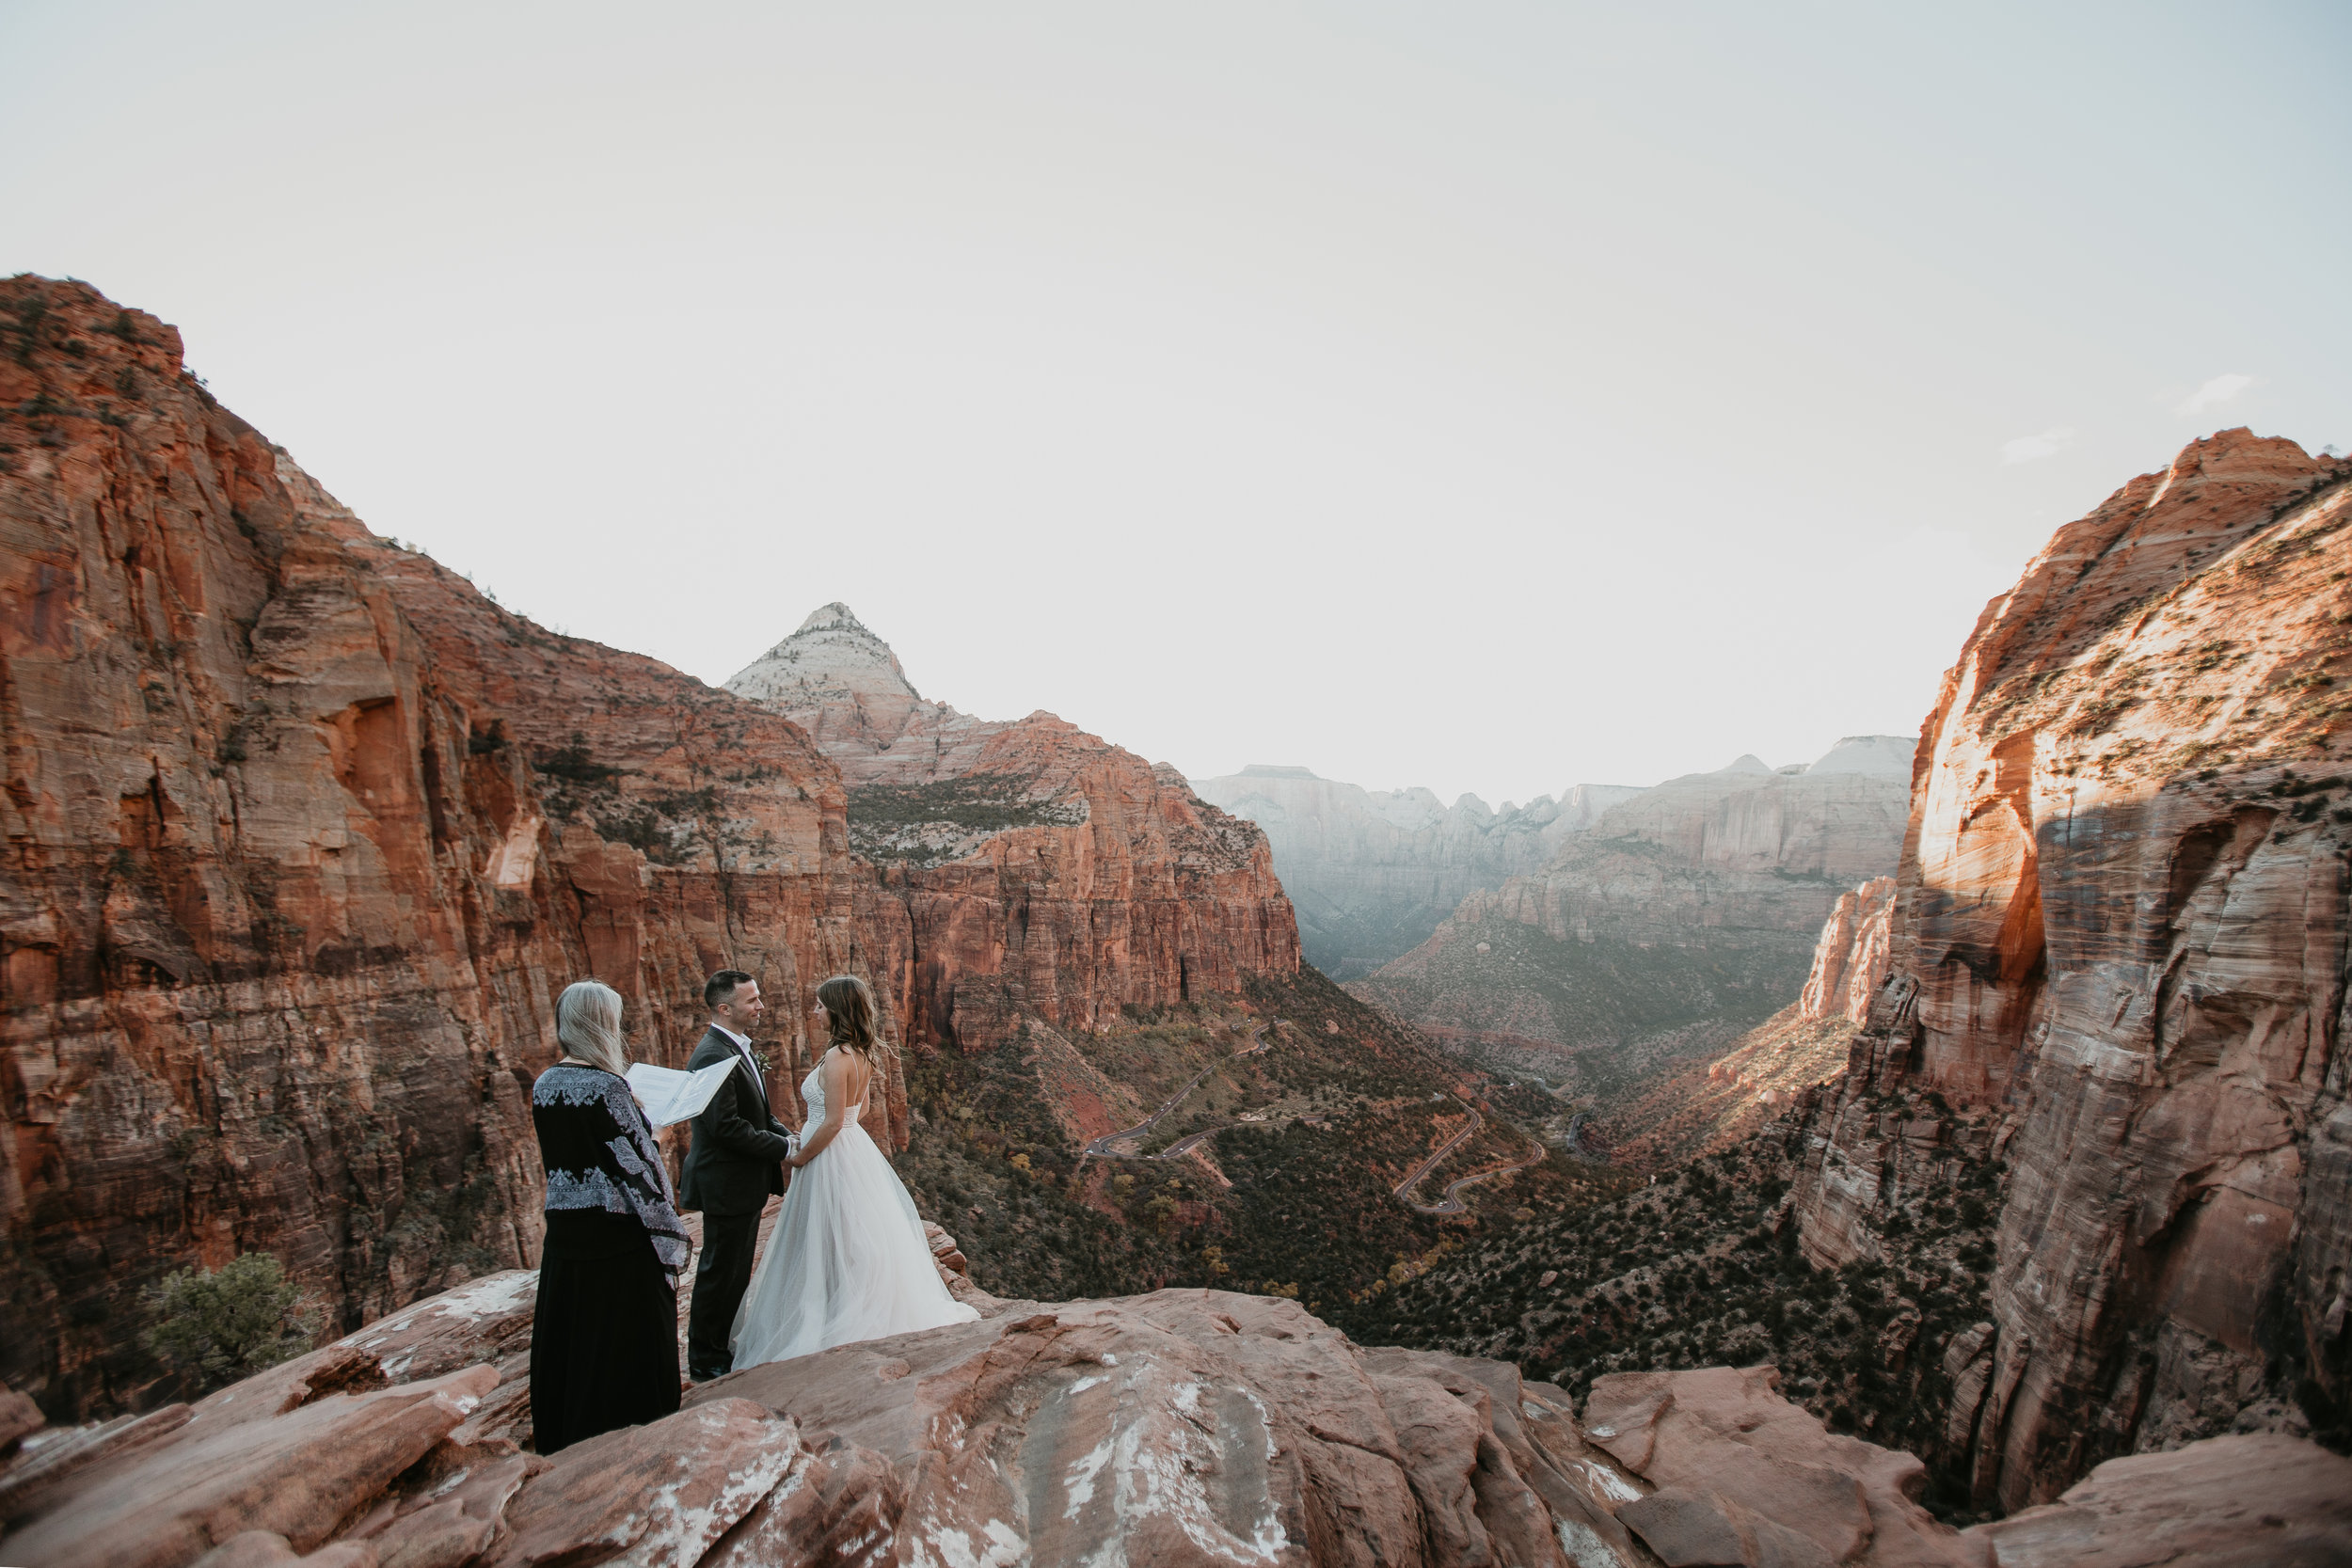 nicole-daacke-photography-zion-national-park-elopement-photographer-canyon-overlook-trail-elope-hiking-adventure-wedding-photos-fall-utah-red-rock-canyon-stgeorge-eloping-photographer-53.jpg